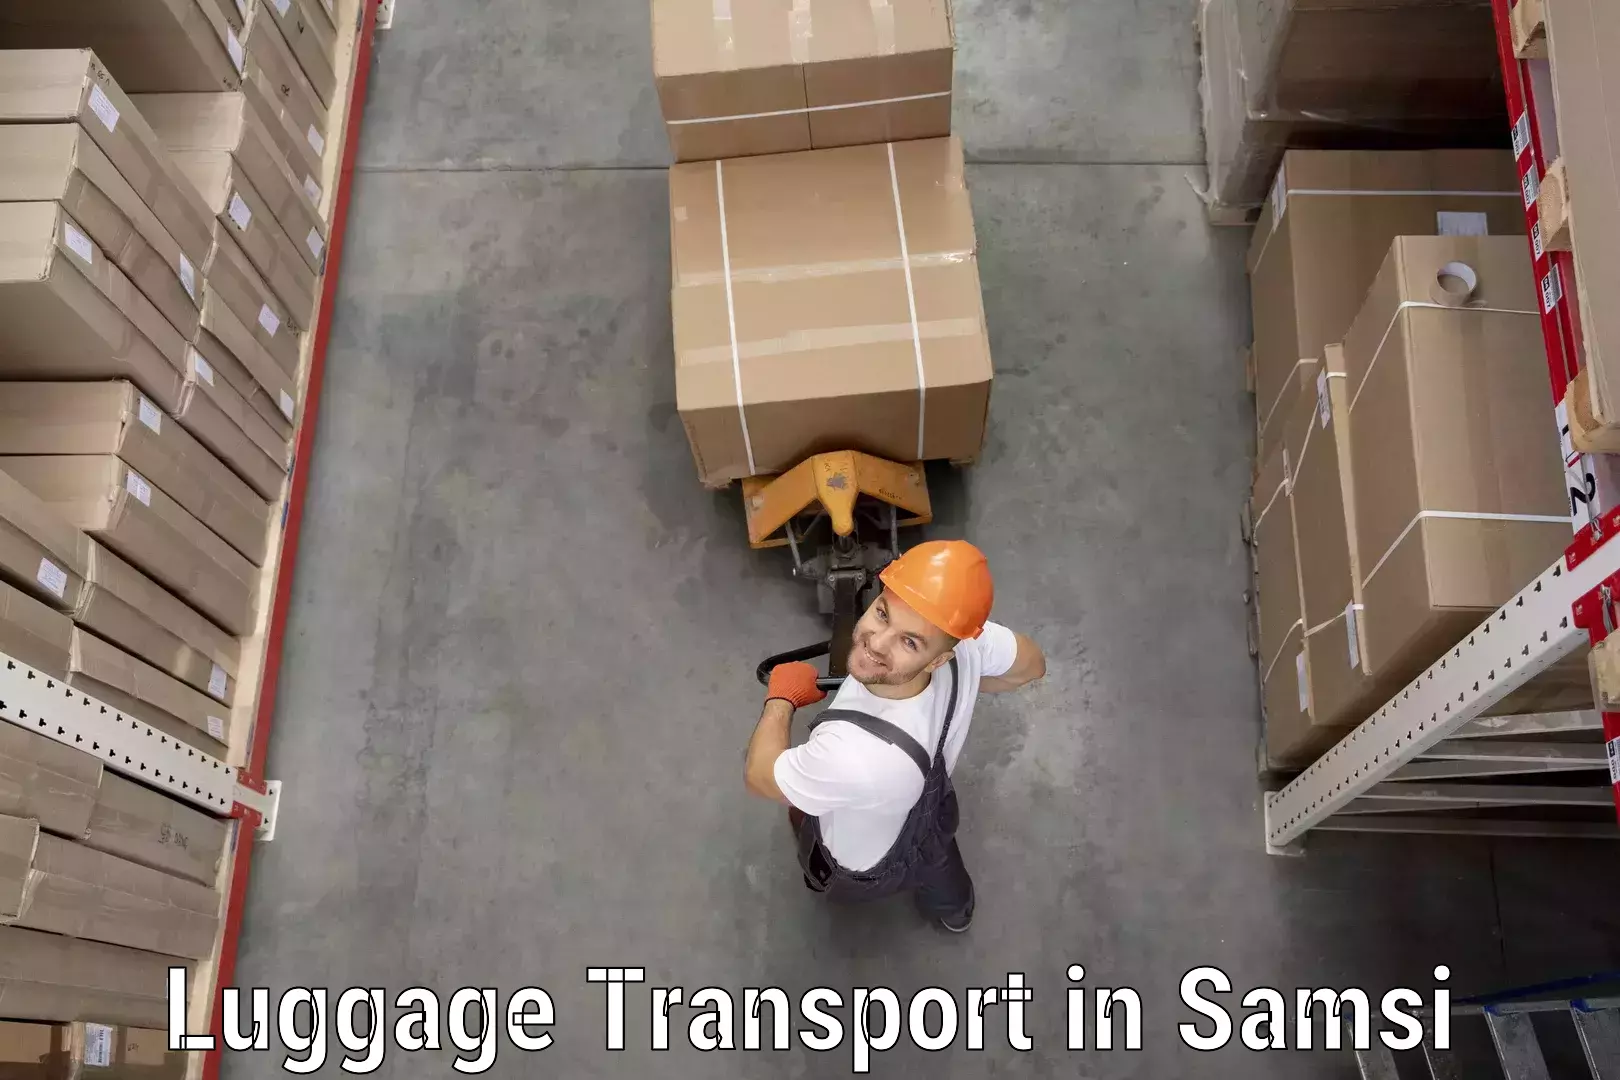 Luggage transport consultancy in Samsi